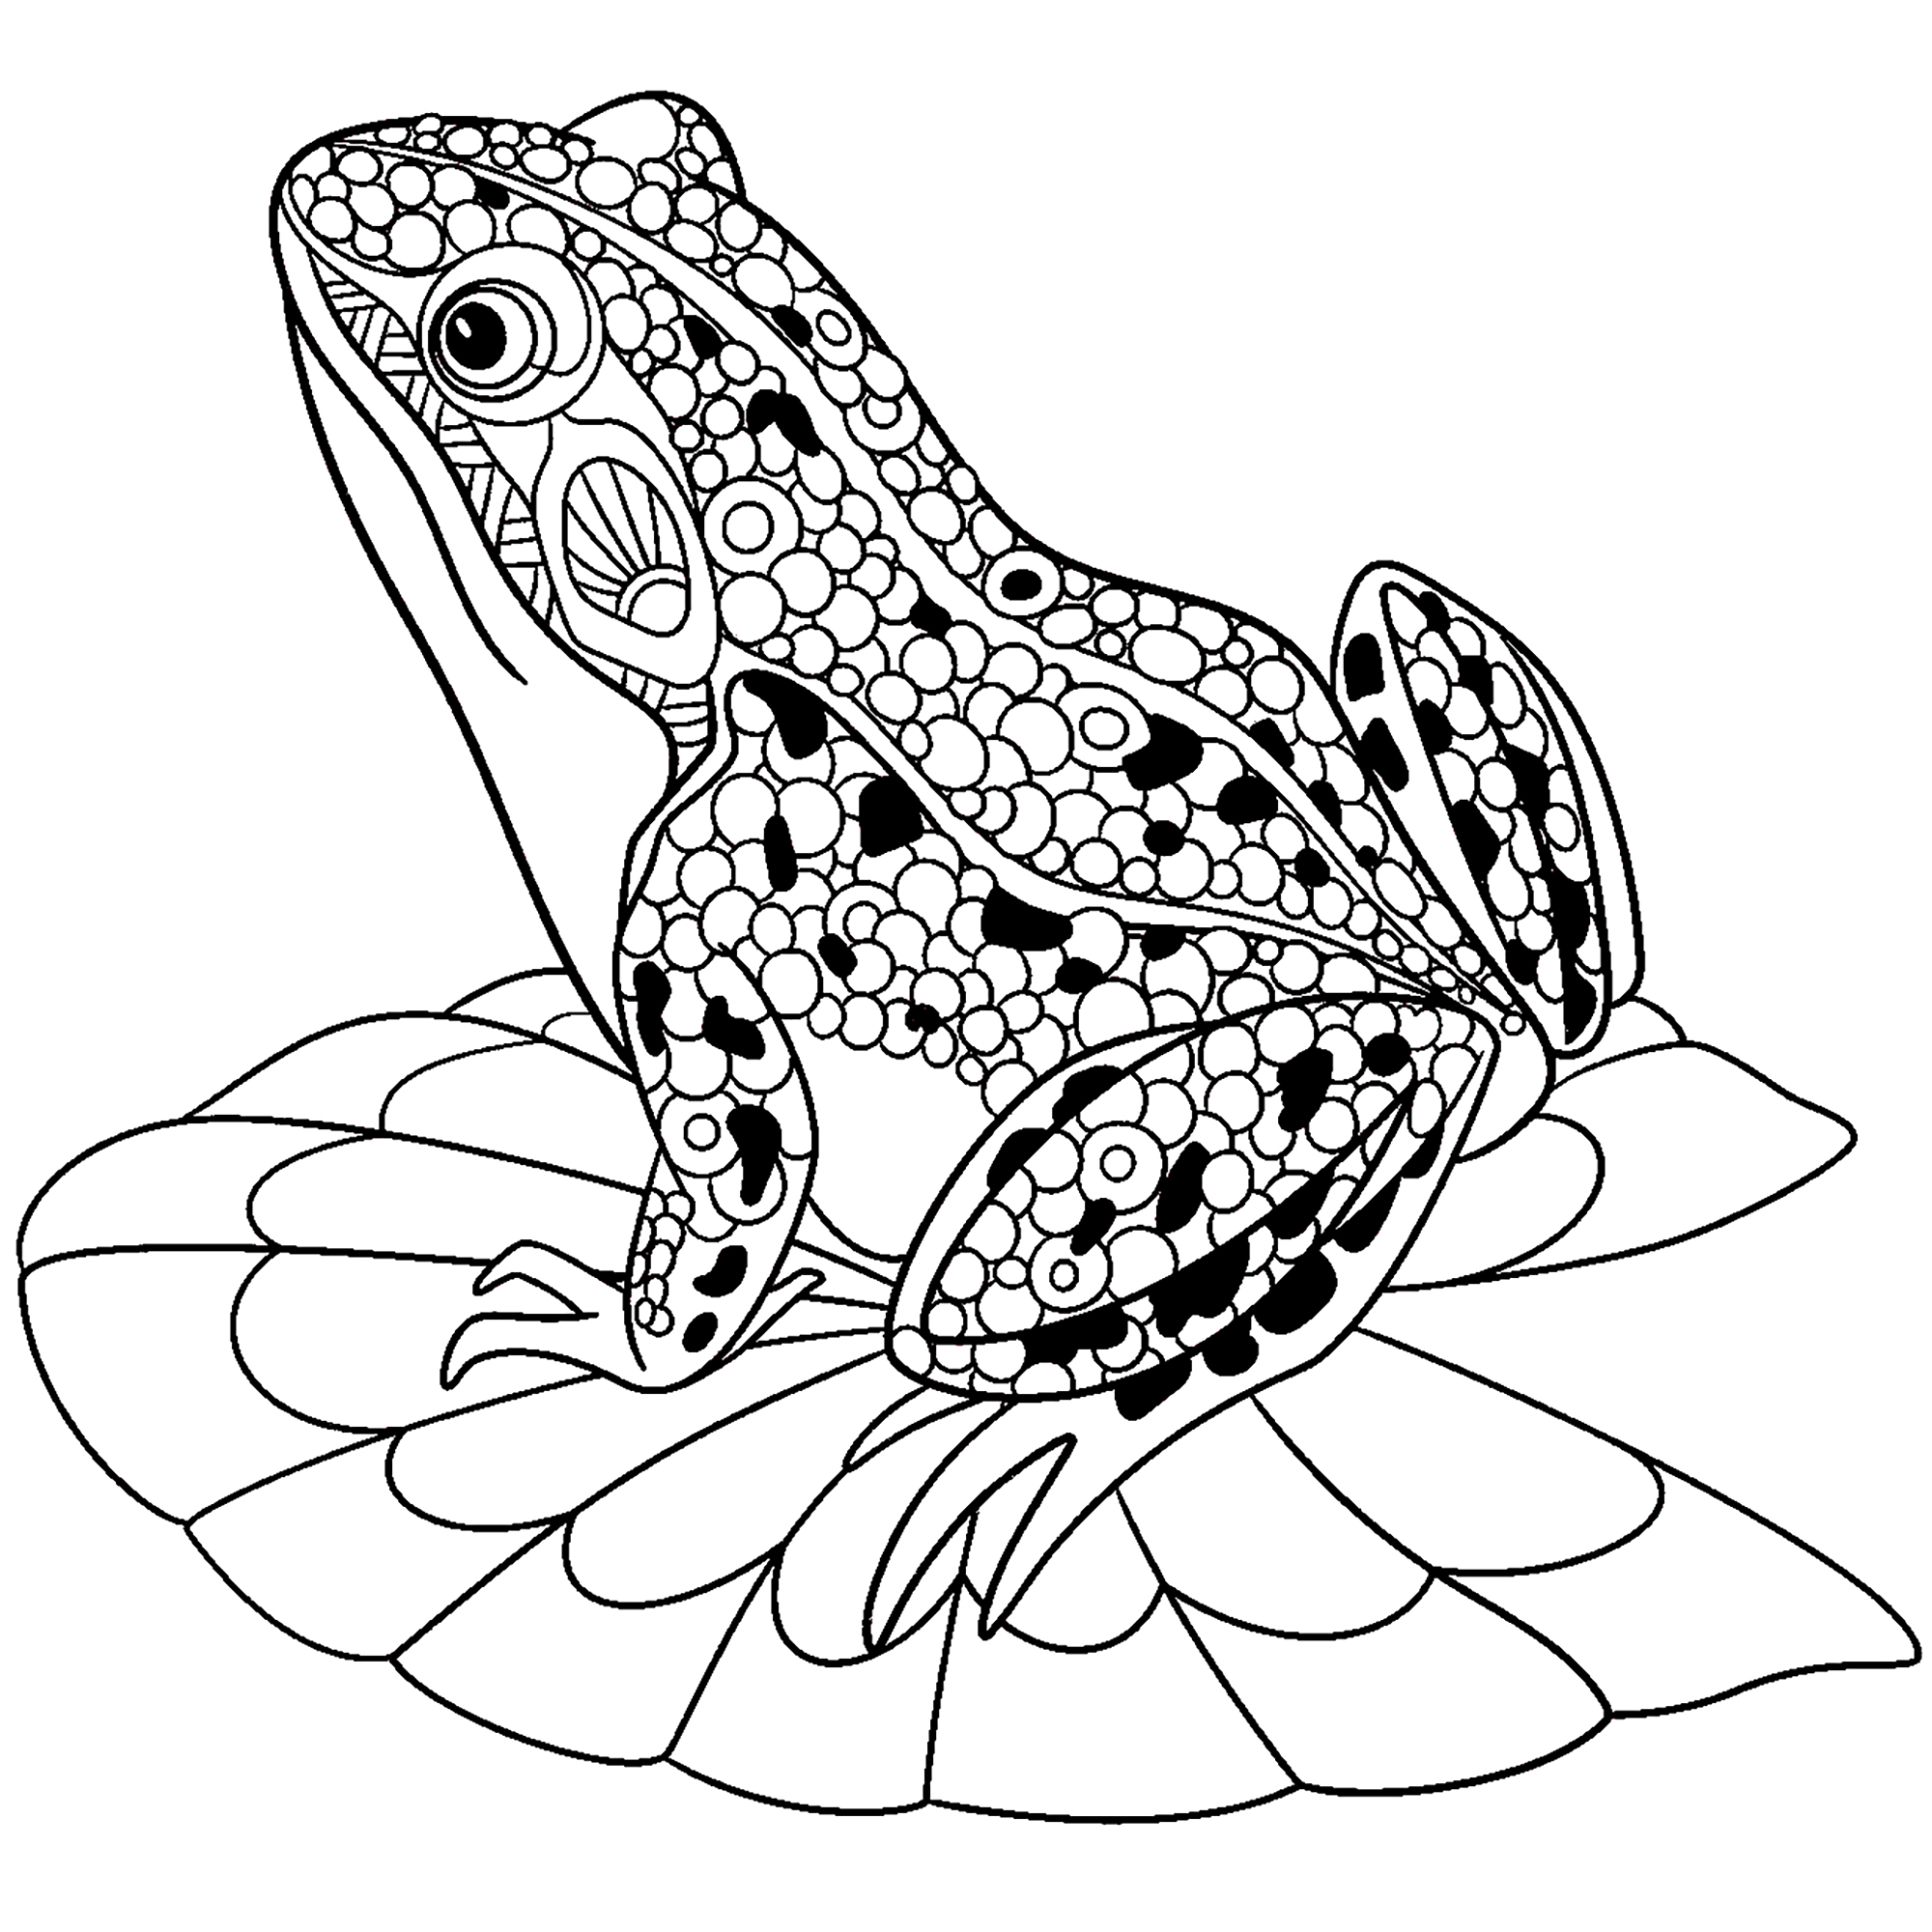 Printable Amphibian Coloring Pages - Amphibian Coloring Pages Frog